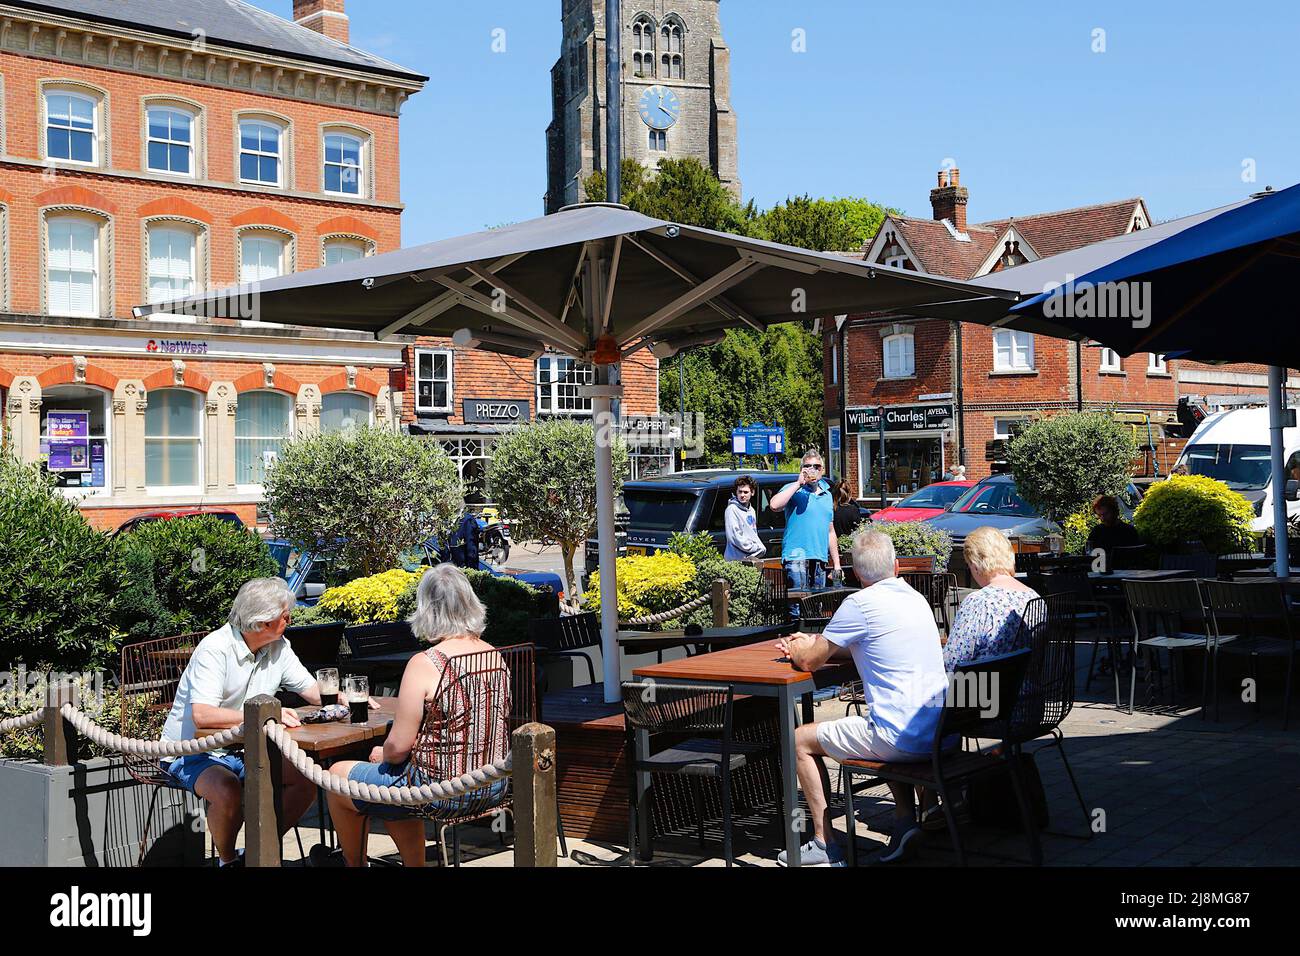 Tenterden, Kent, UK. 17 May, 2022. UK Weather: Sunny afternoon in the Kent town of Tenterden as temperatures are expected to reach the mid twenties. Busy pub quenching the thirst of punters on a hot day. People eating and drinking outside. Photo Credit: Paul Lawrenson /Alamy Live News Stock Photo